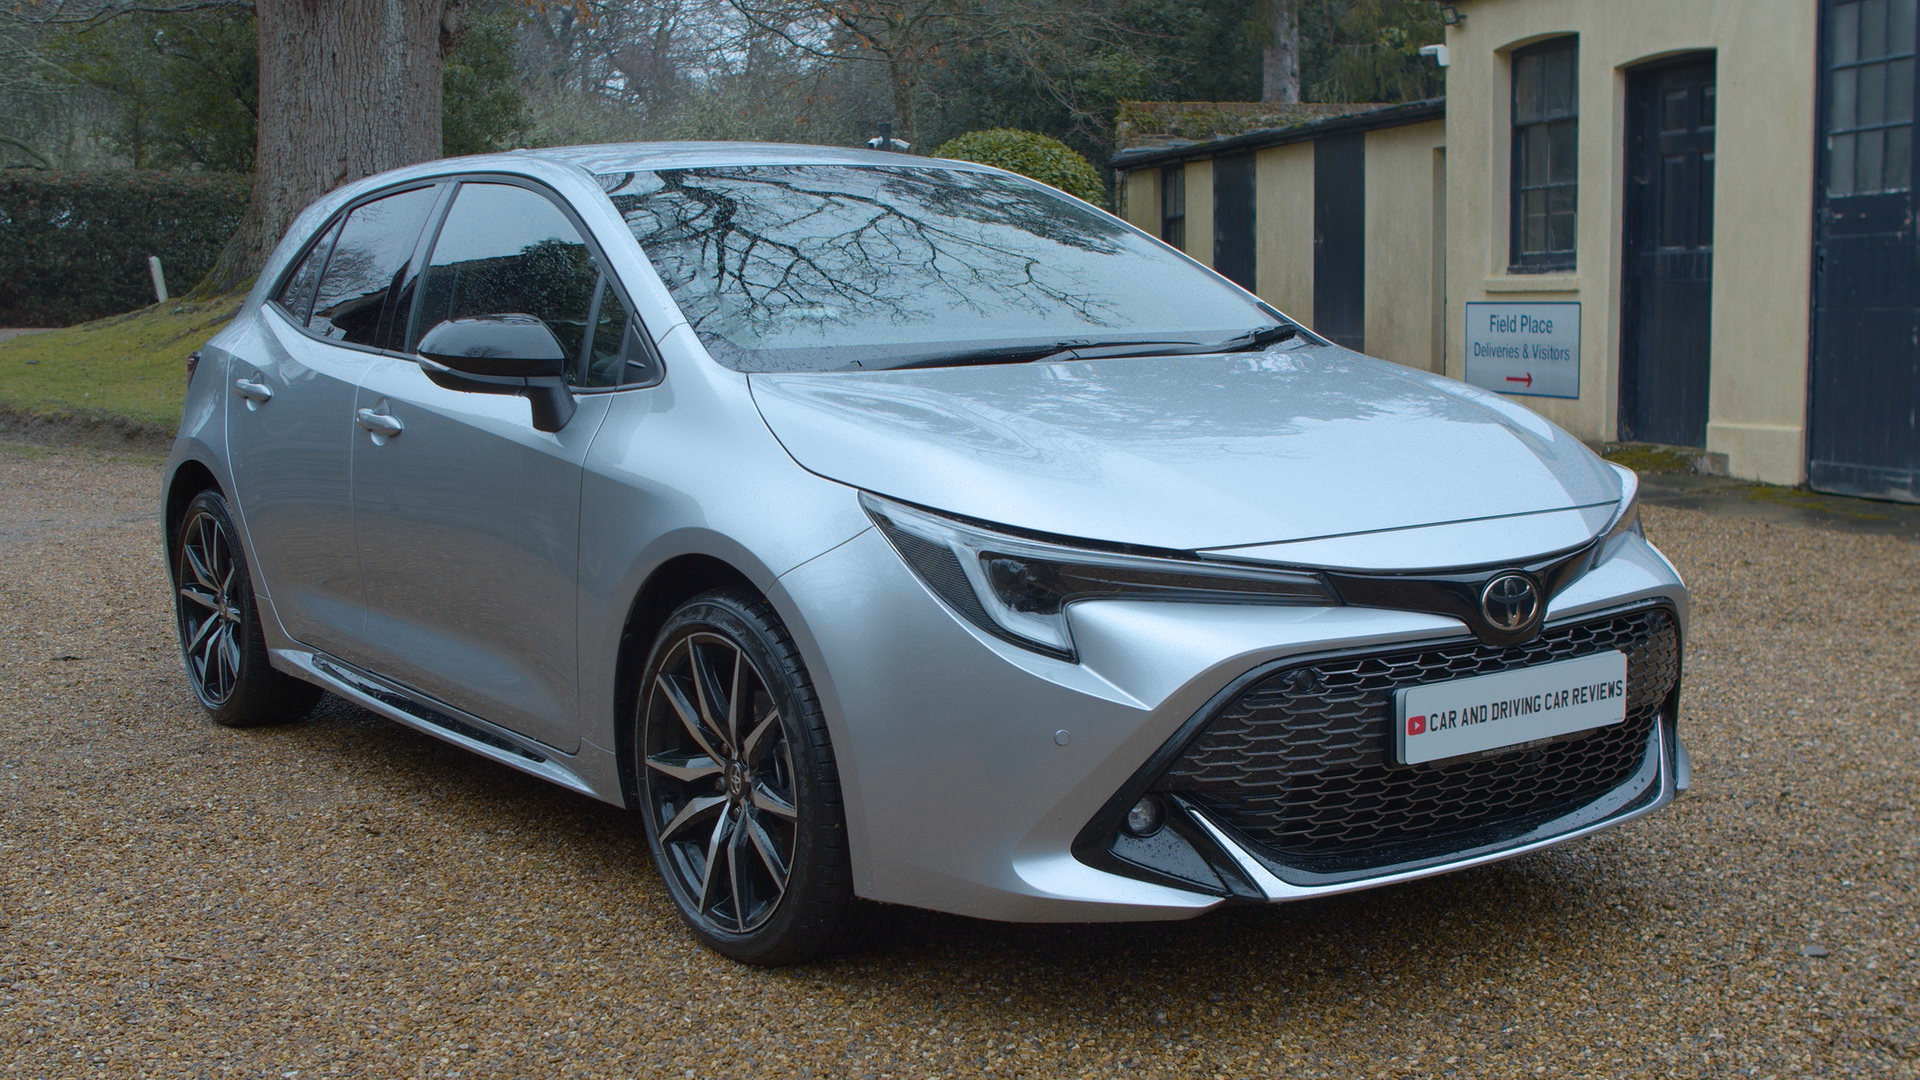 TOYOTA COROLLA TOURING SPORT 2.0 Hybrid Excel 5dr CVT [Panoramic Roof]